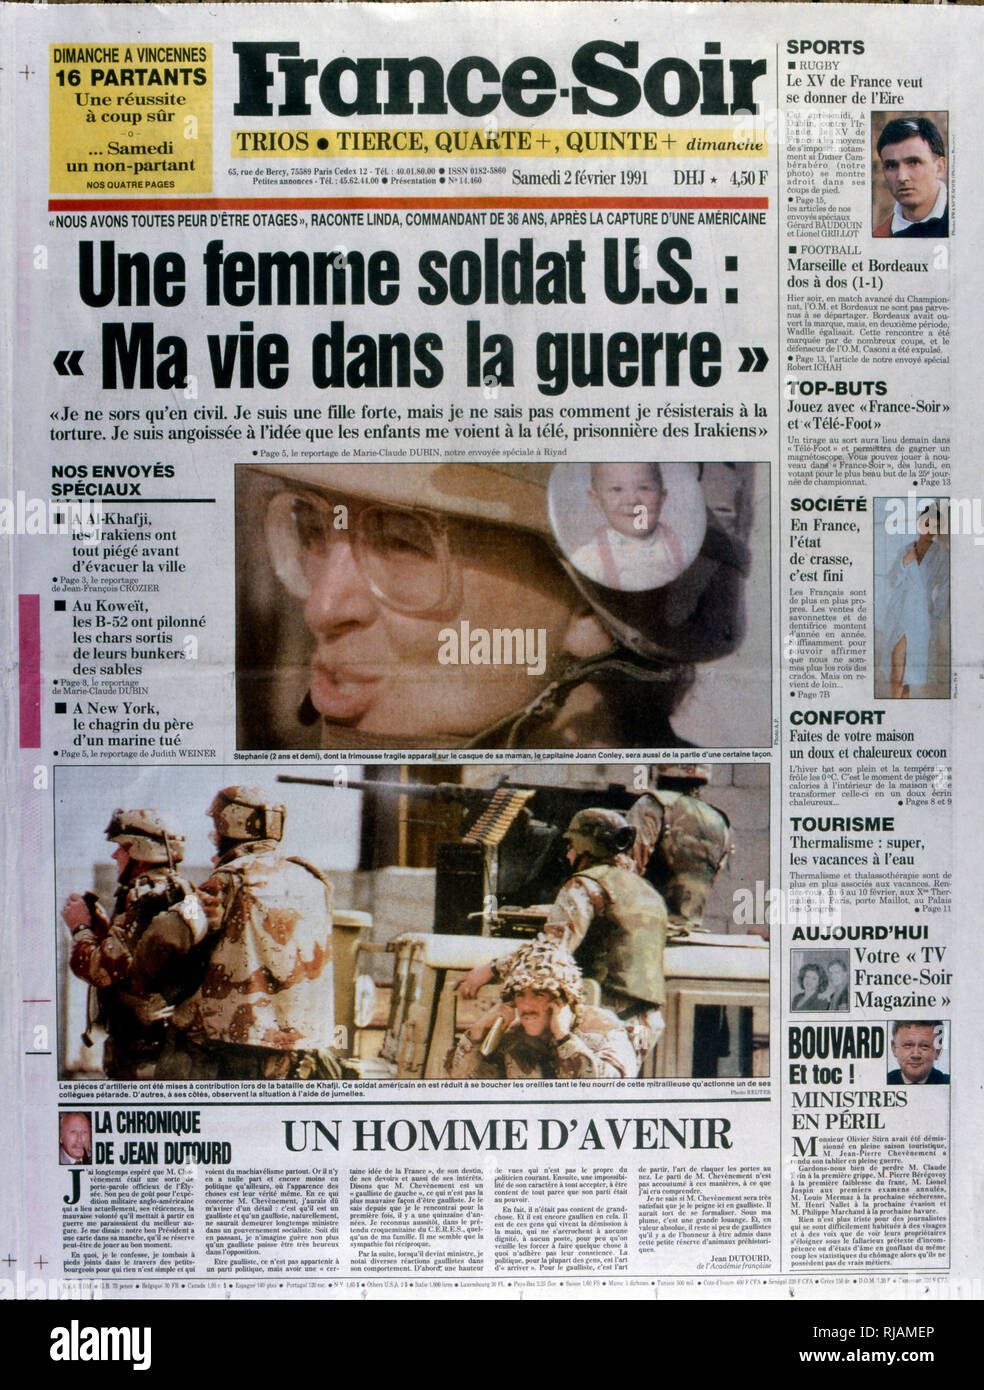 Front Page of the French publication 'France-Soir' reporting the last days of the Gulf War, 2nd February 1991. The Gulf War (2 August 1990 - 28 February 1991), codenamed Operation Desert Shield and Operation Desert Storm, was a war waged by coalition forces from 35 nations led by the United States against Iraq in response to Iraq's invasion and annexation of Kuwait. Stock Photo